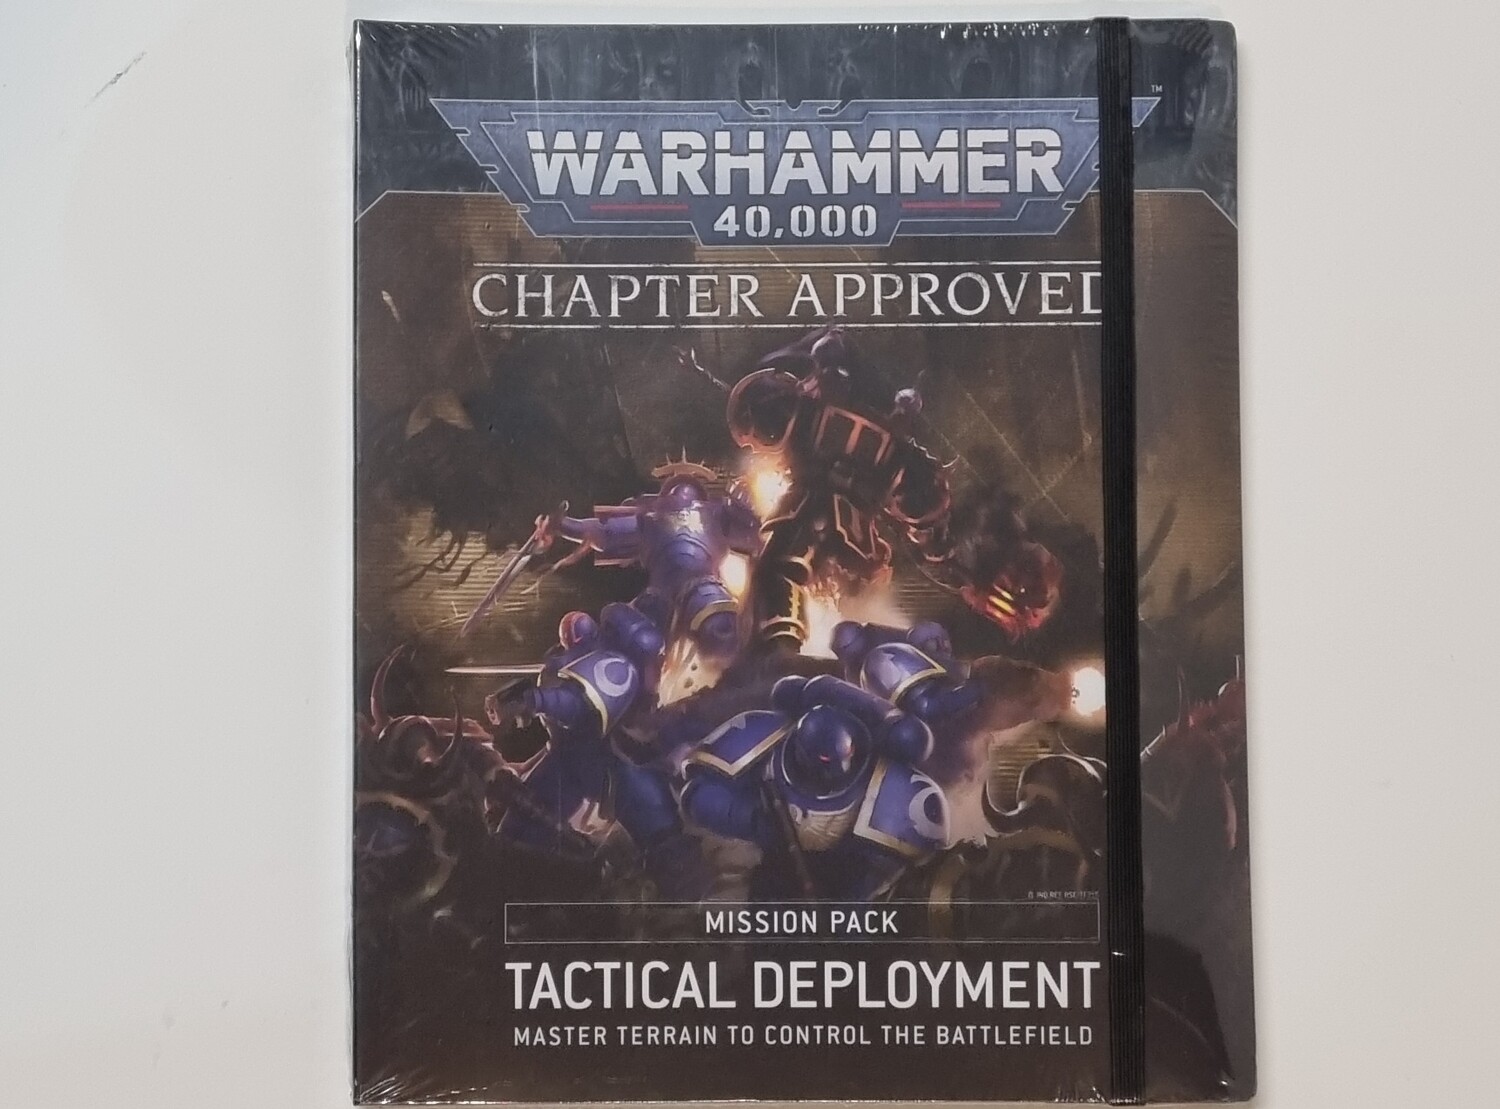 Warhammer 40k, Chapter Approval Mission Pack: Tactical Deployment, Book